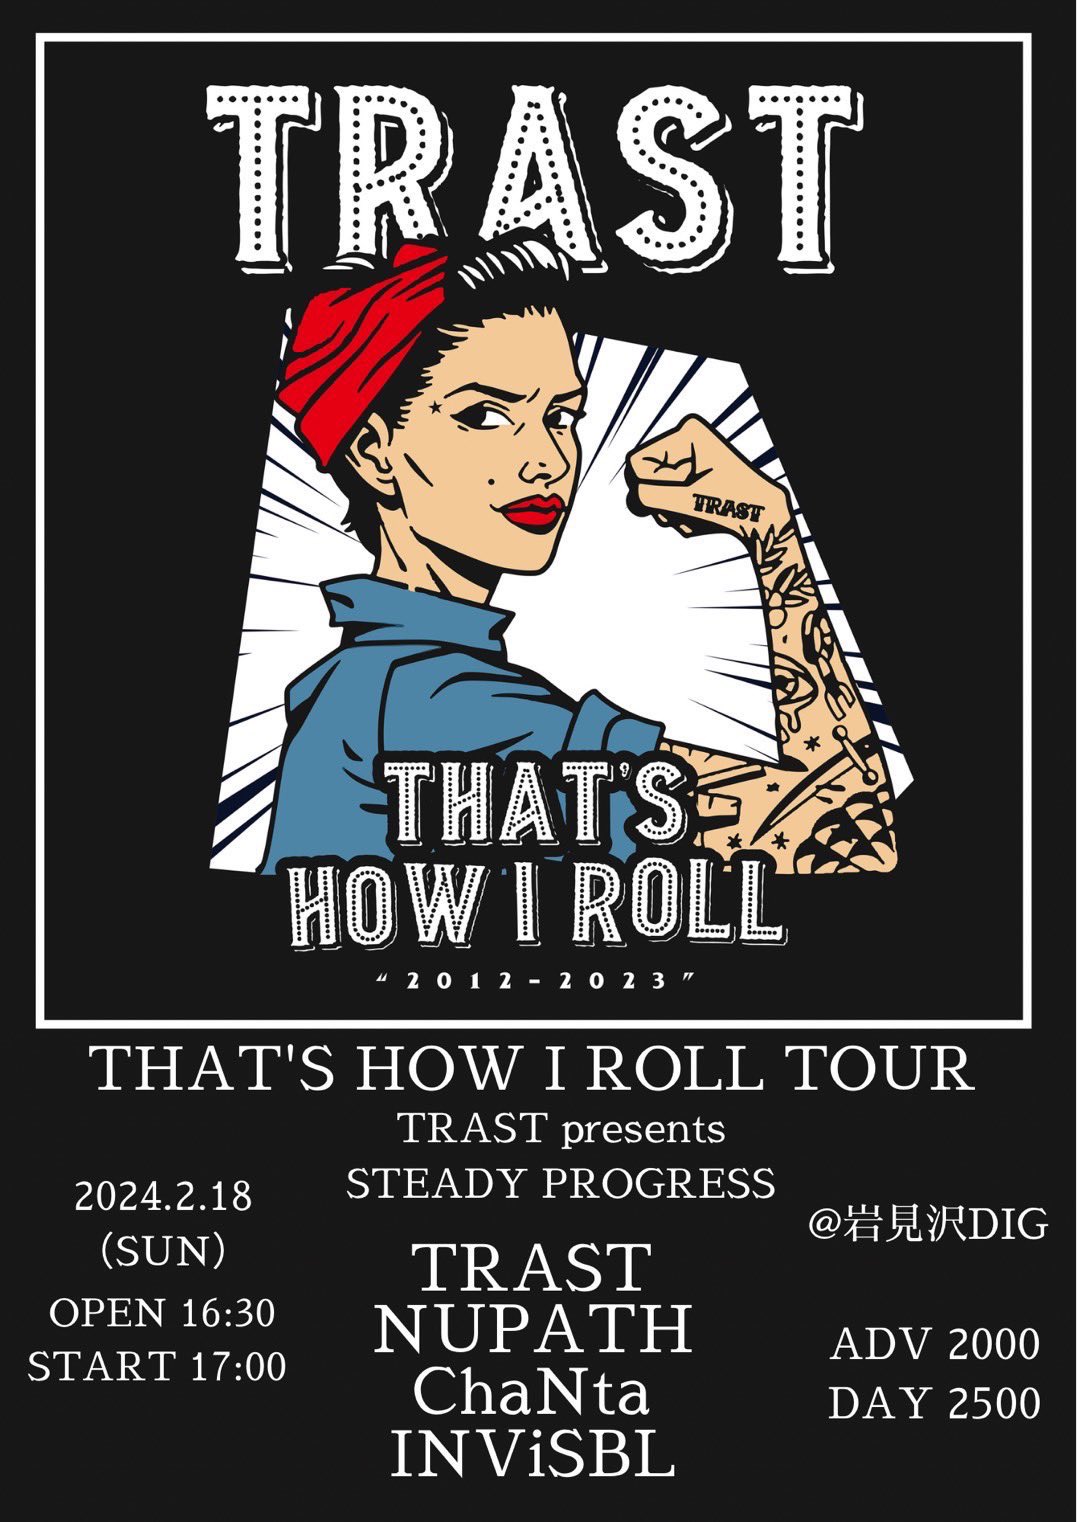 THAT’S HOW I ROLL TOUR